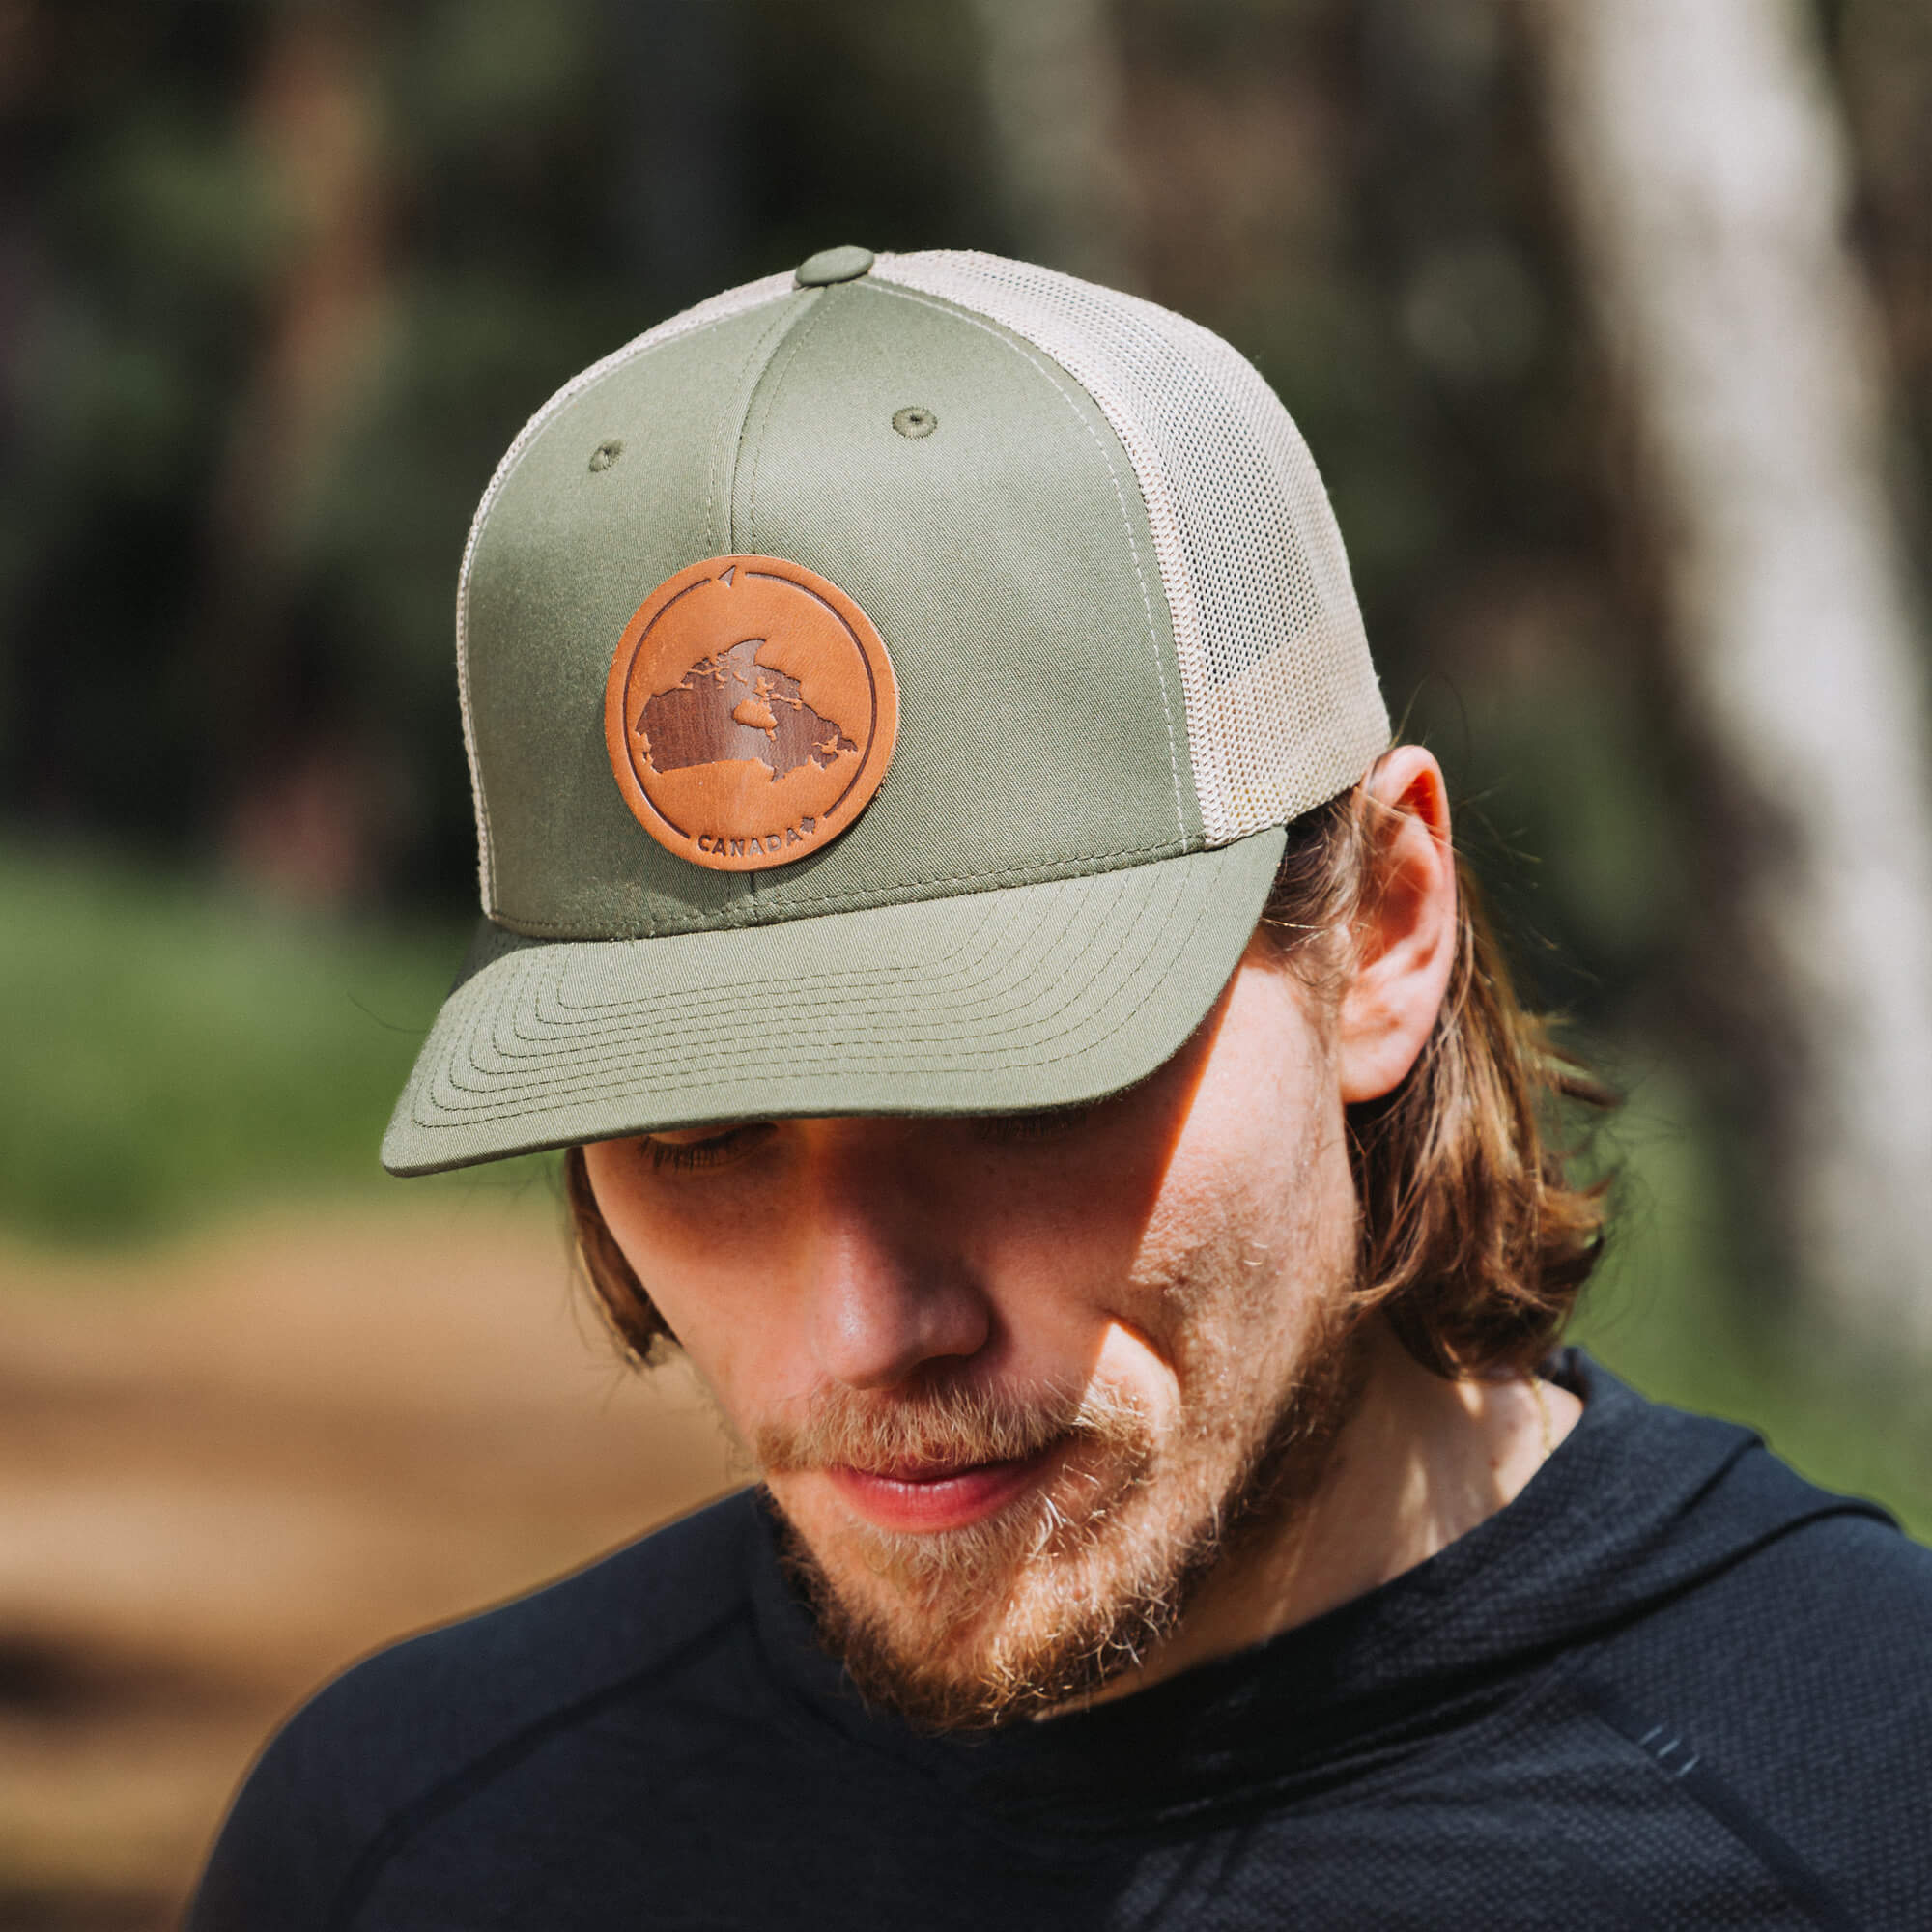 Canada Leather Patch Hat, Charcoal - Trucker Hat, Made in Canada with Full-Grain Leather